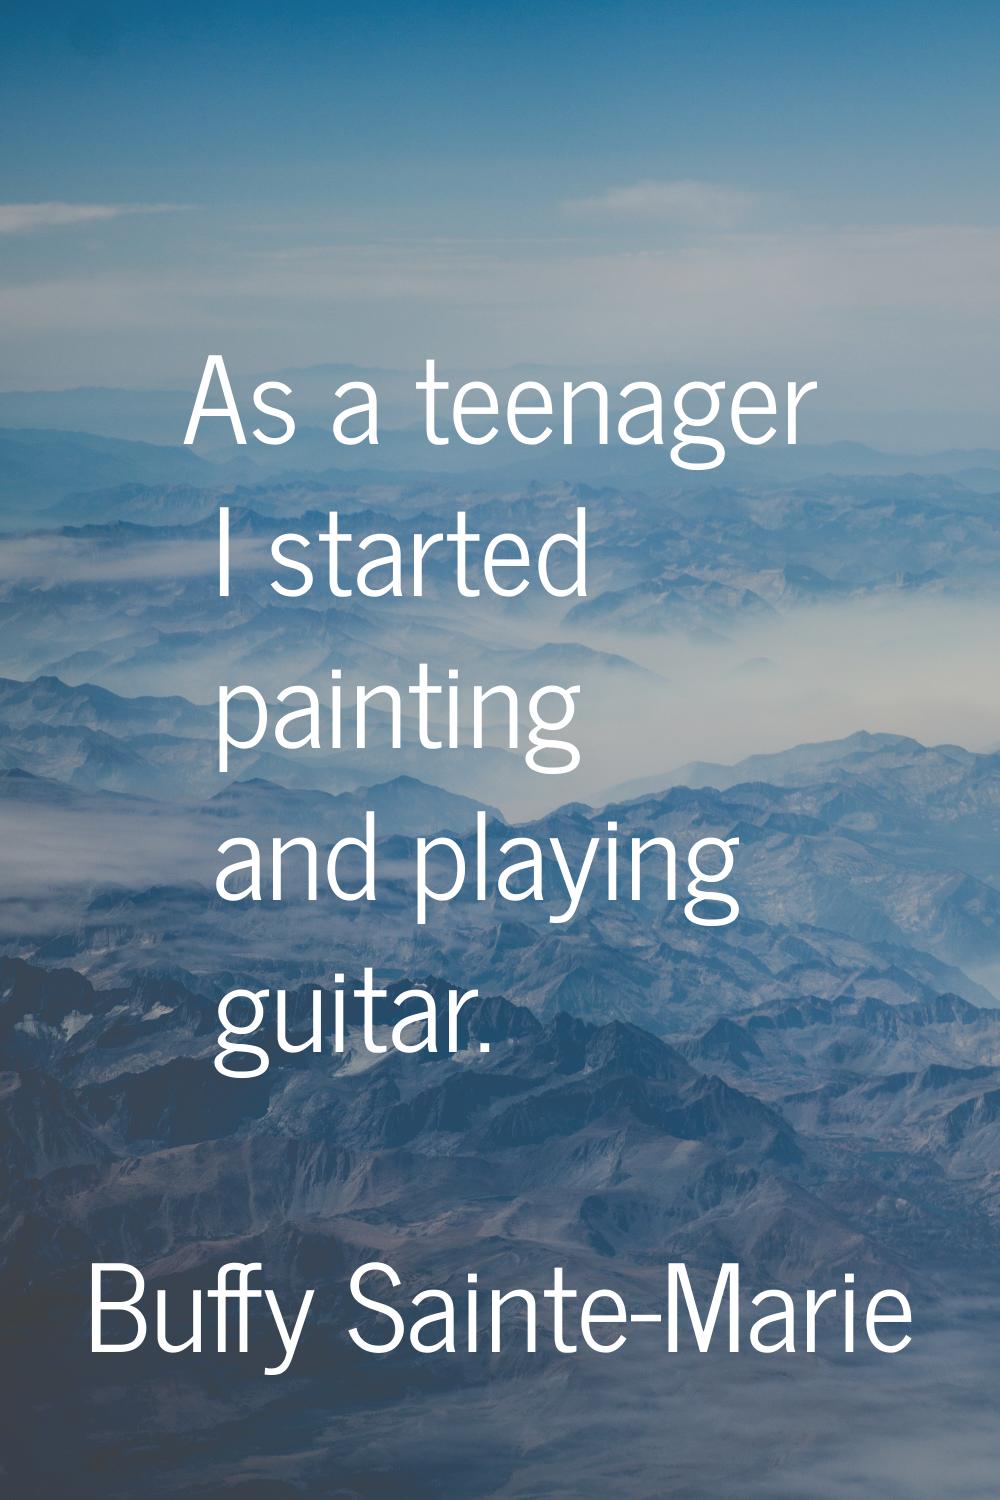 As a teenager I started painting and playing guitar.